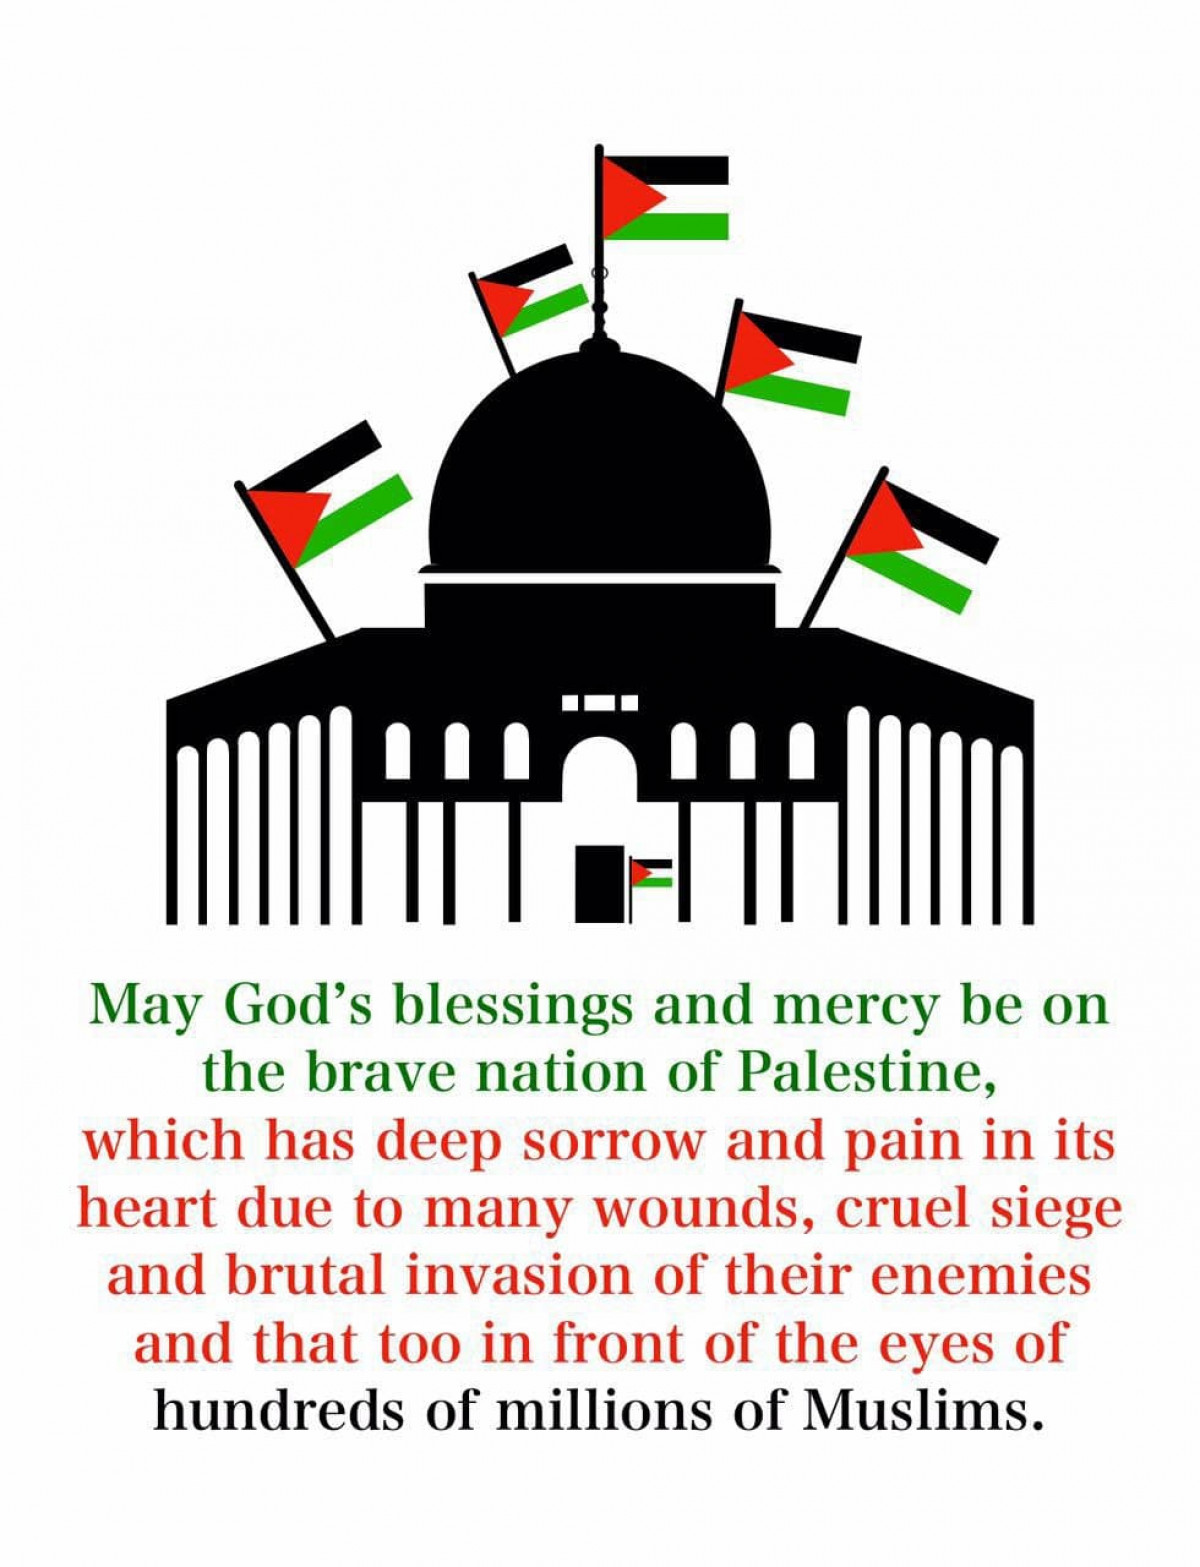 May God's blessings and mercy be on the brave nation of Palestine